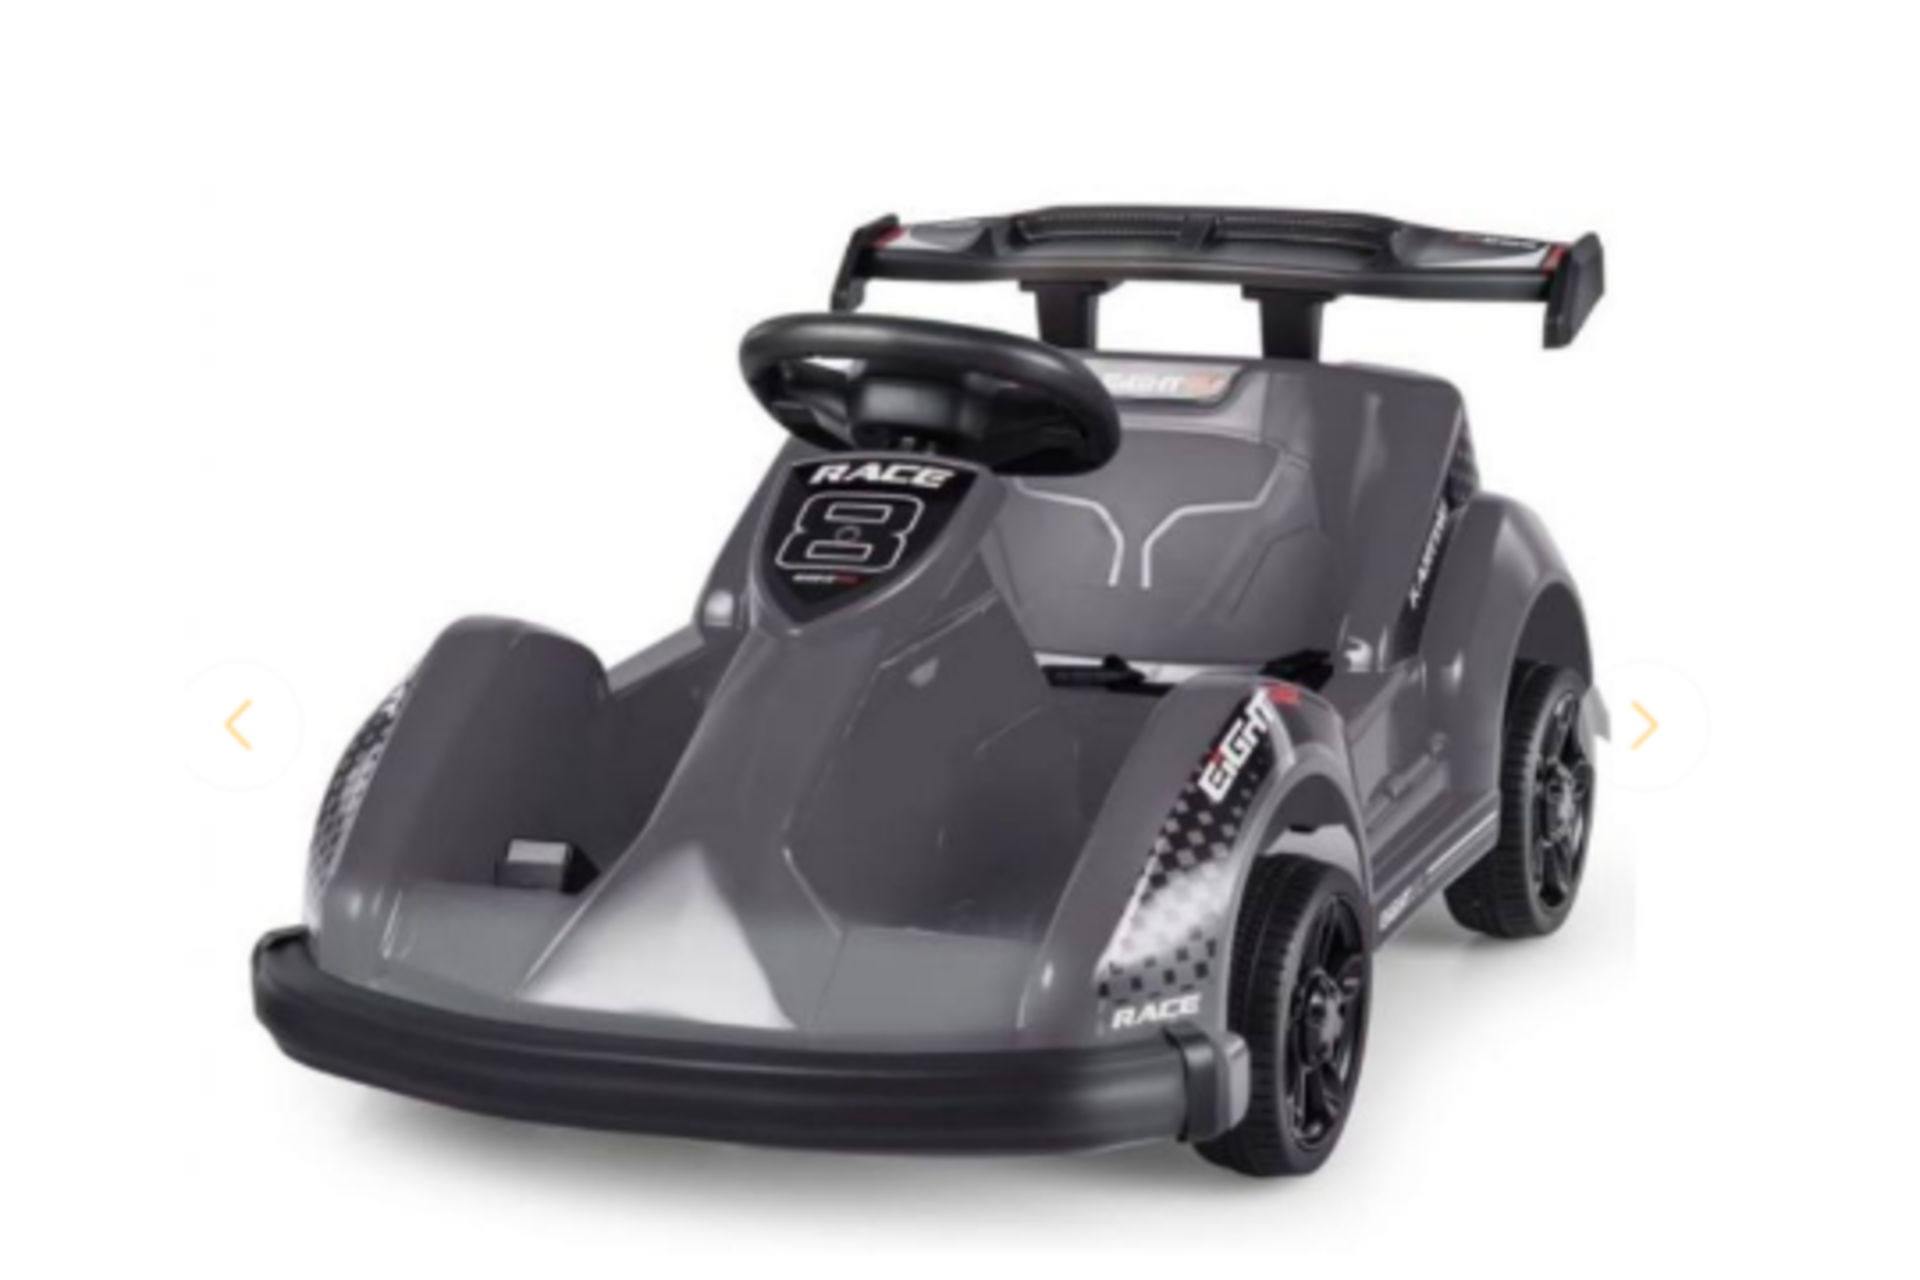 Kids 6V Electric Go Kart Powered Ride on Car with Remote Control and Music (R51)Kids can use buttons